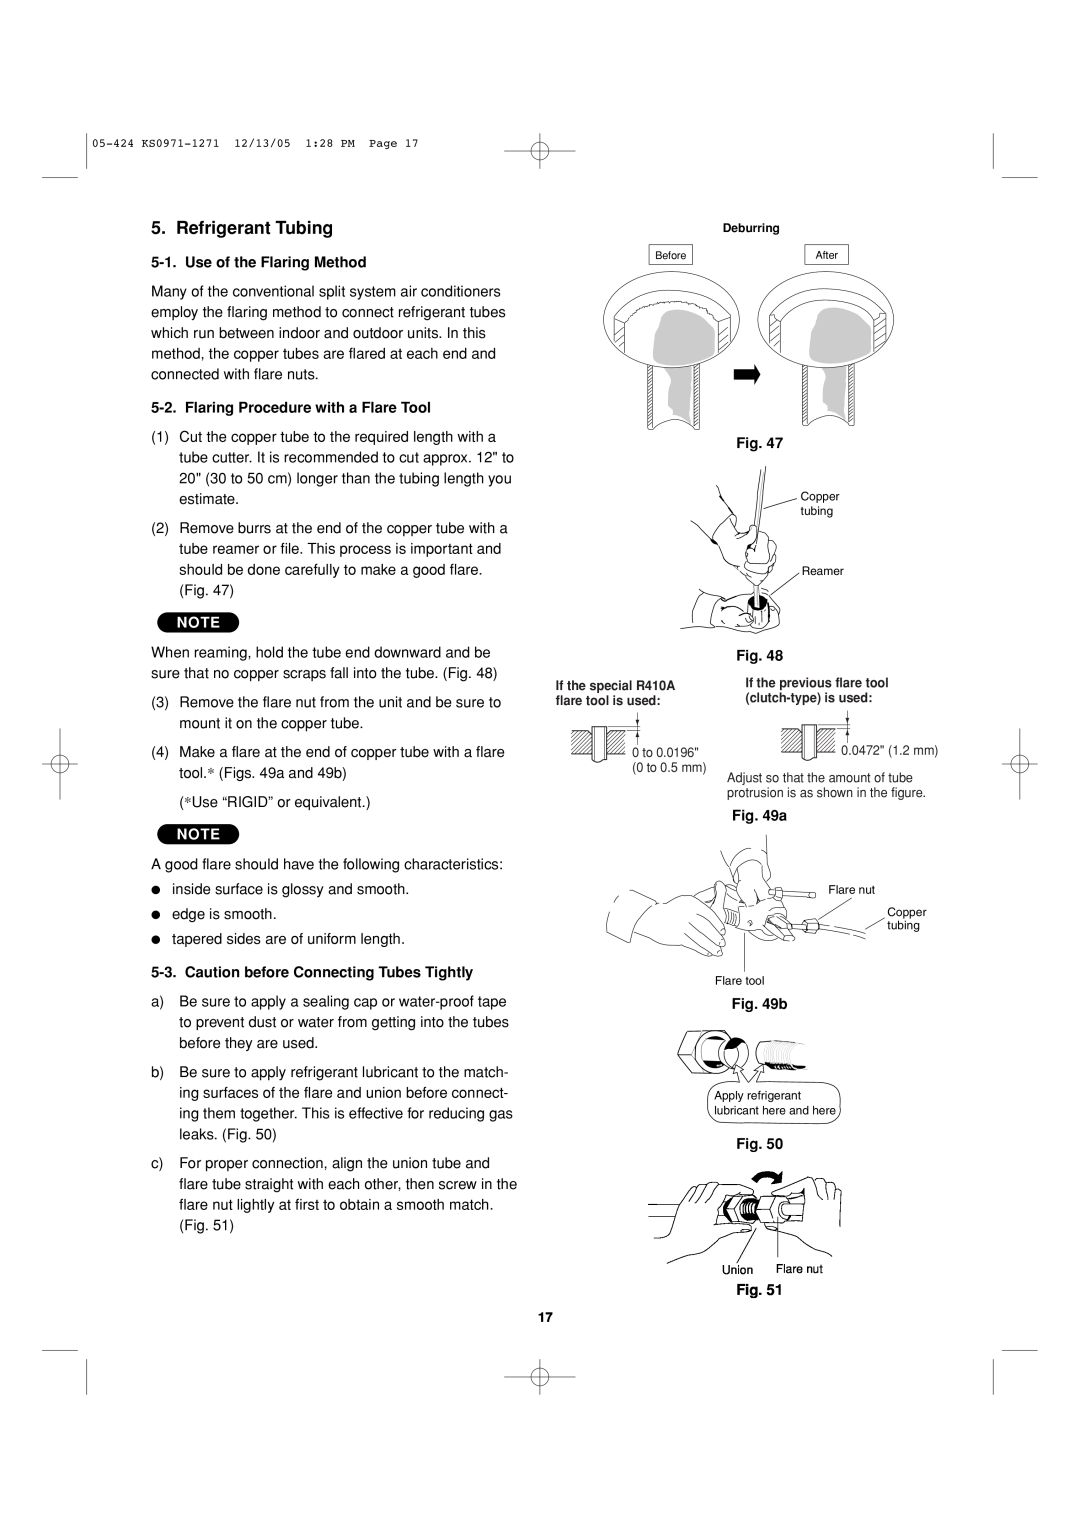 Sanyo Cool/Dry installation instructions Refrigerant Tubing, Use of the Flaring Method, Flaring Procedure with a Flare Tool 